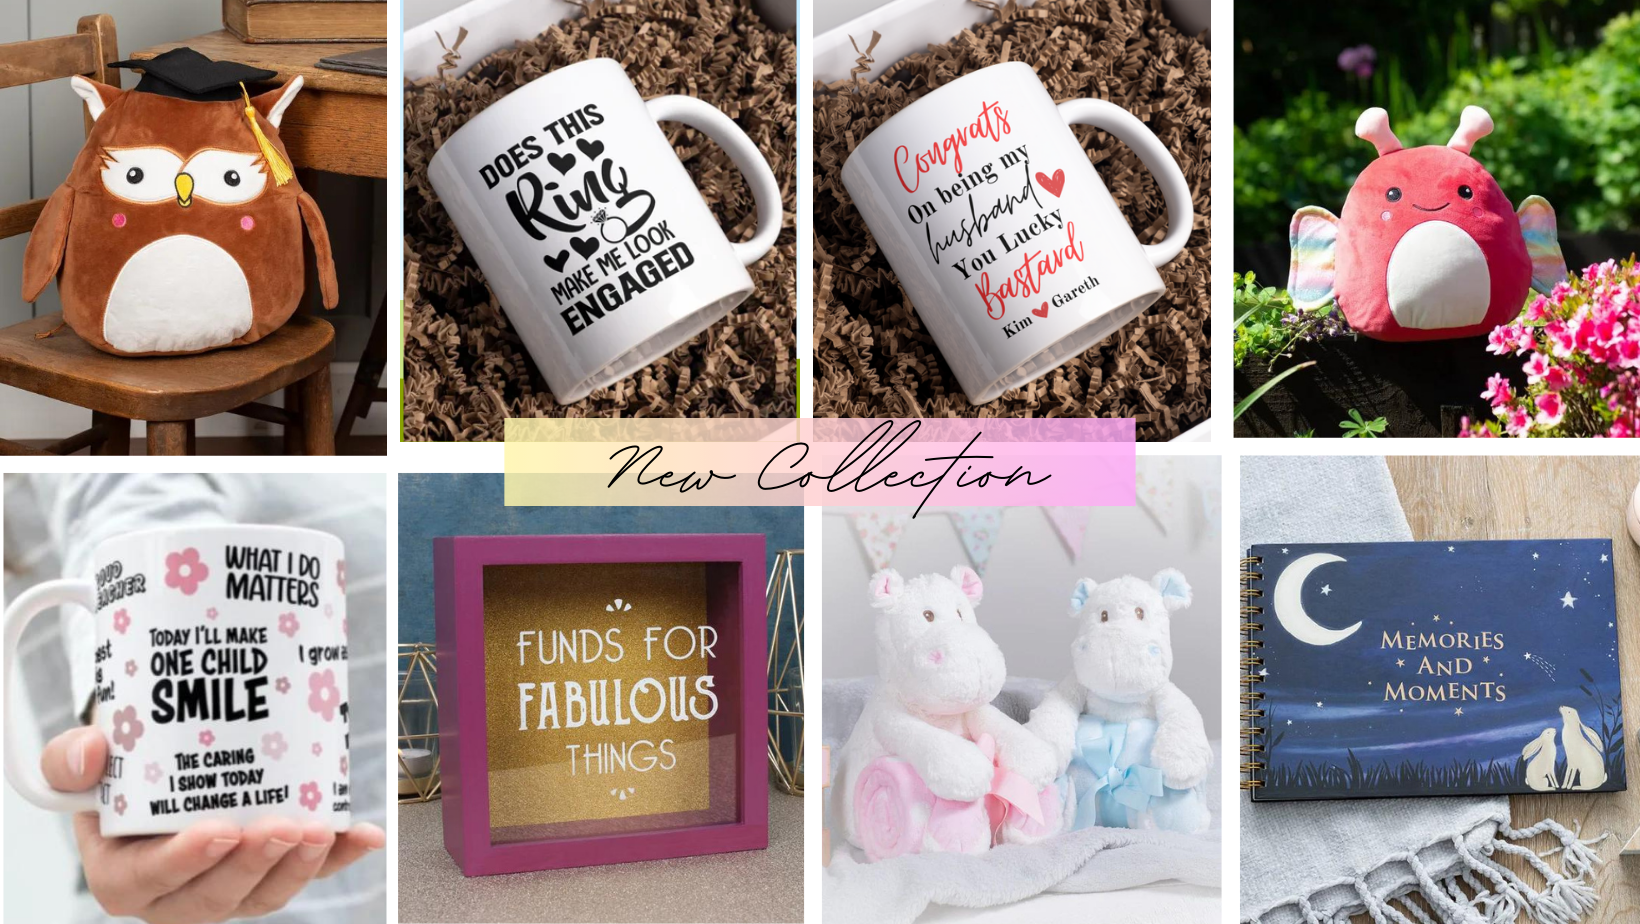 Shop Unique Gifts for Every Occasion, Gift Shop